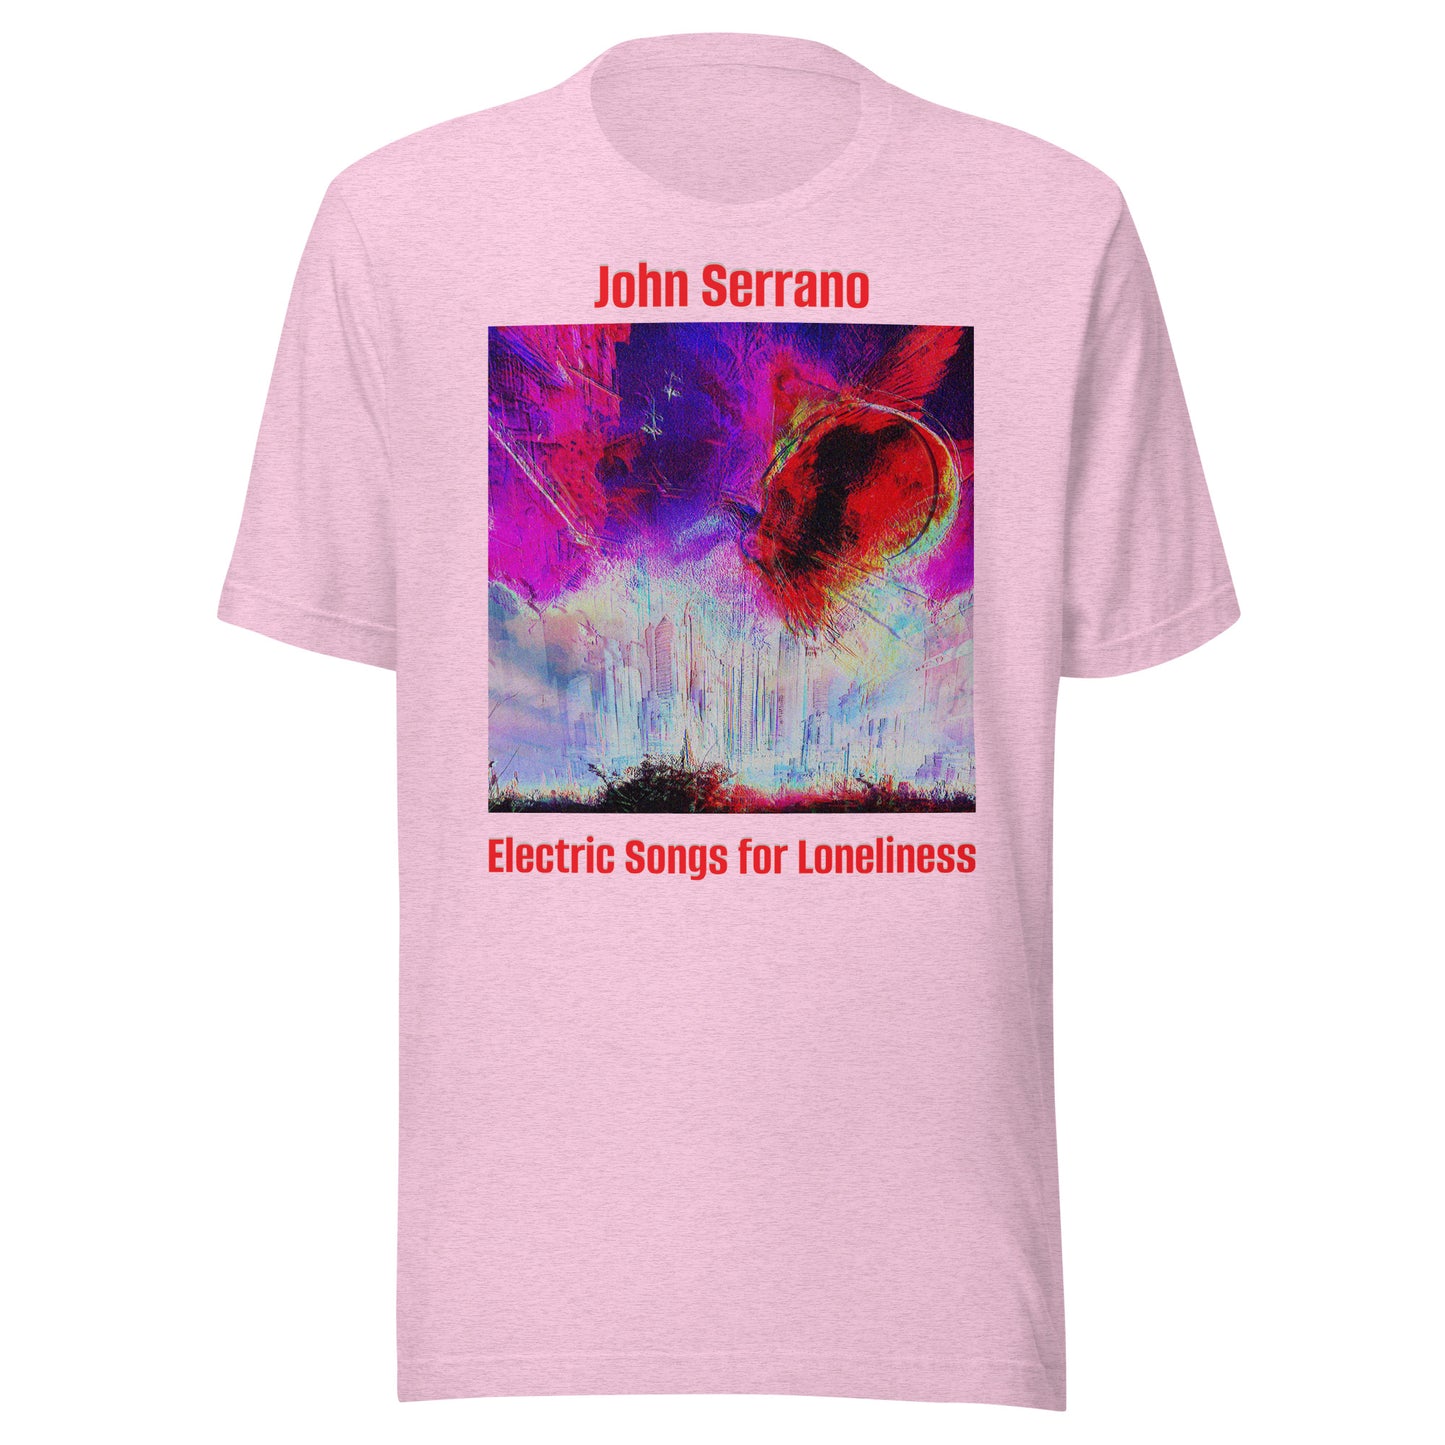 John Serrano - Electric Songs For Loneliness T-Shirt